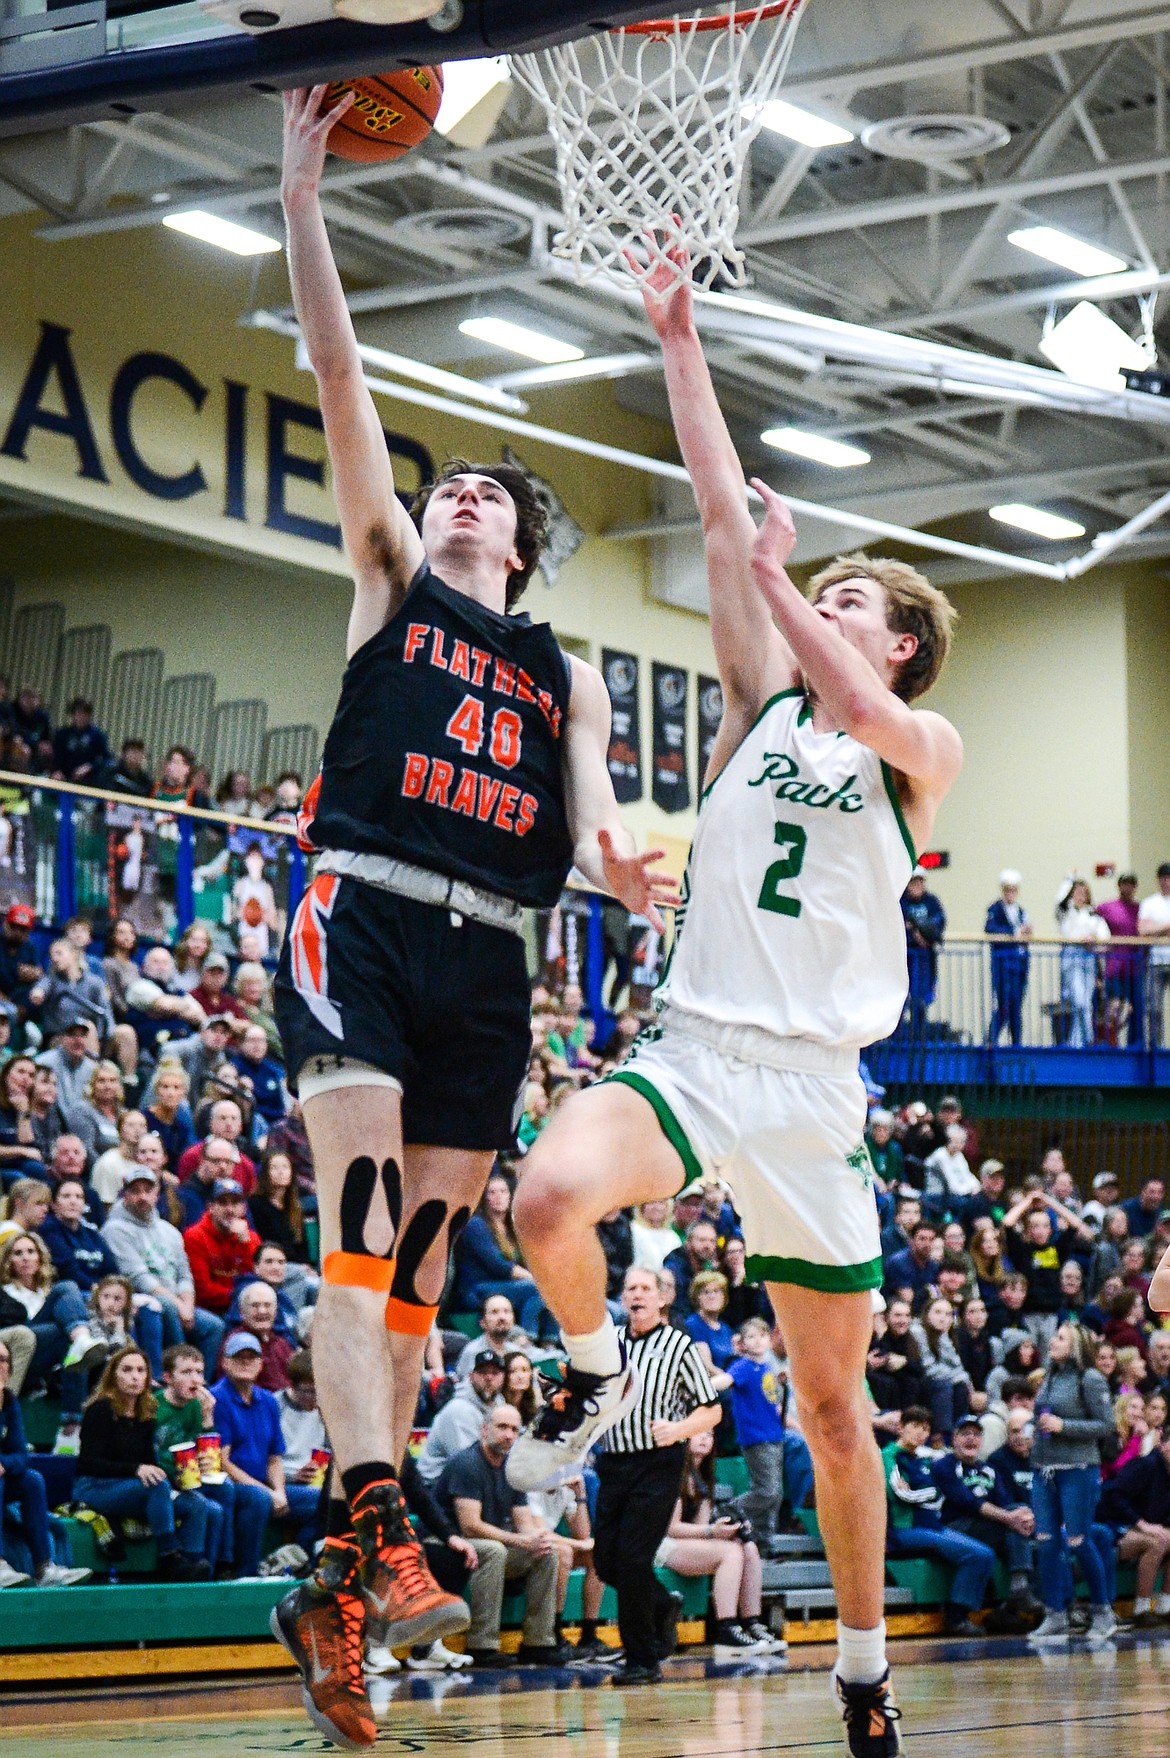 Flathead's Noah Cummings (40) goes to the basket against Glacier's Tyler McDonald (2) during crosstown basketball at Glacier High School on Friday, Jan. 20. (Casey Kreider/Daily Inter Lake)